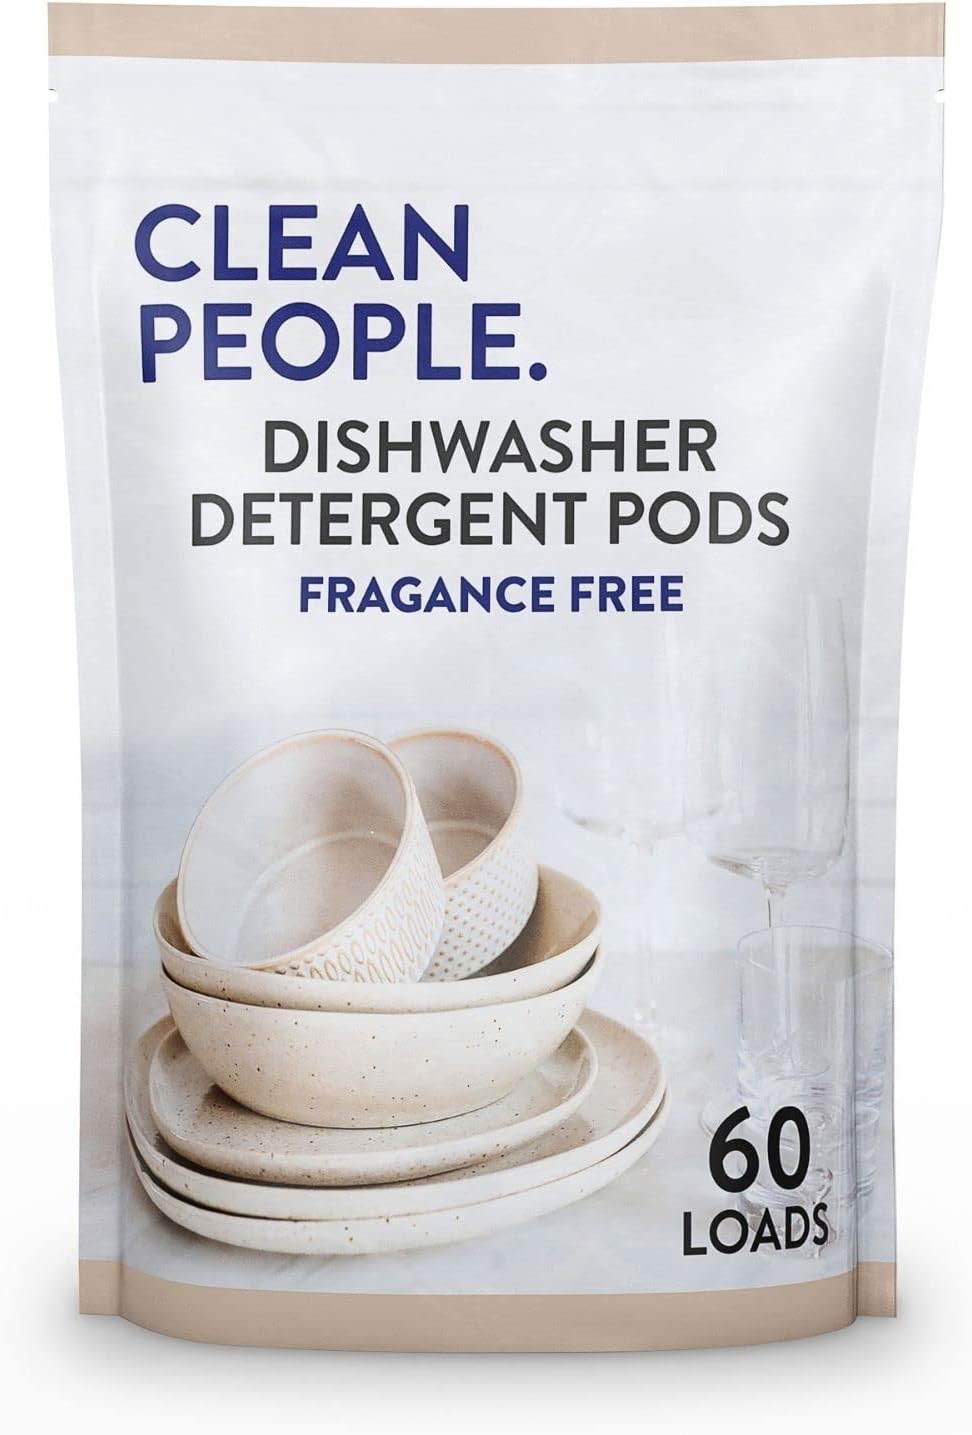 Clean People All Natural Dishwasher Pods - Dishwasher Detergent Pods - Cuts Grease & Rinses Sparkling Clean - Residue-Free - Fragrance Free Dishwashing Pods - Unscented, 60 Pack